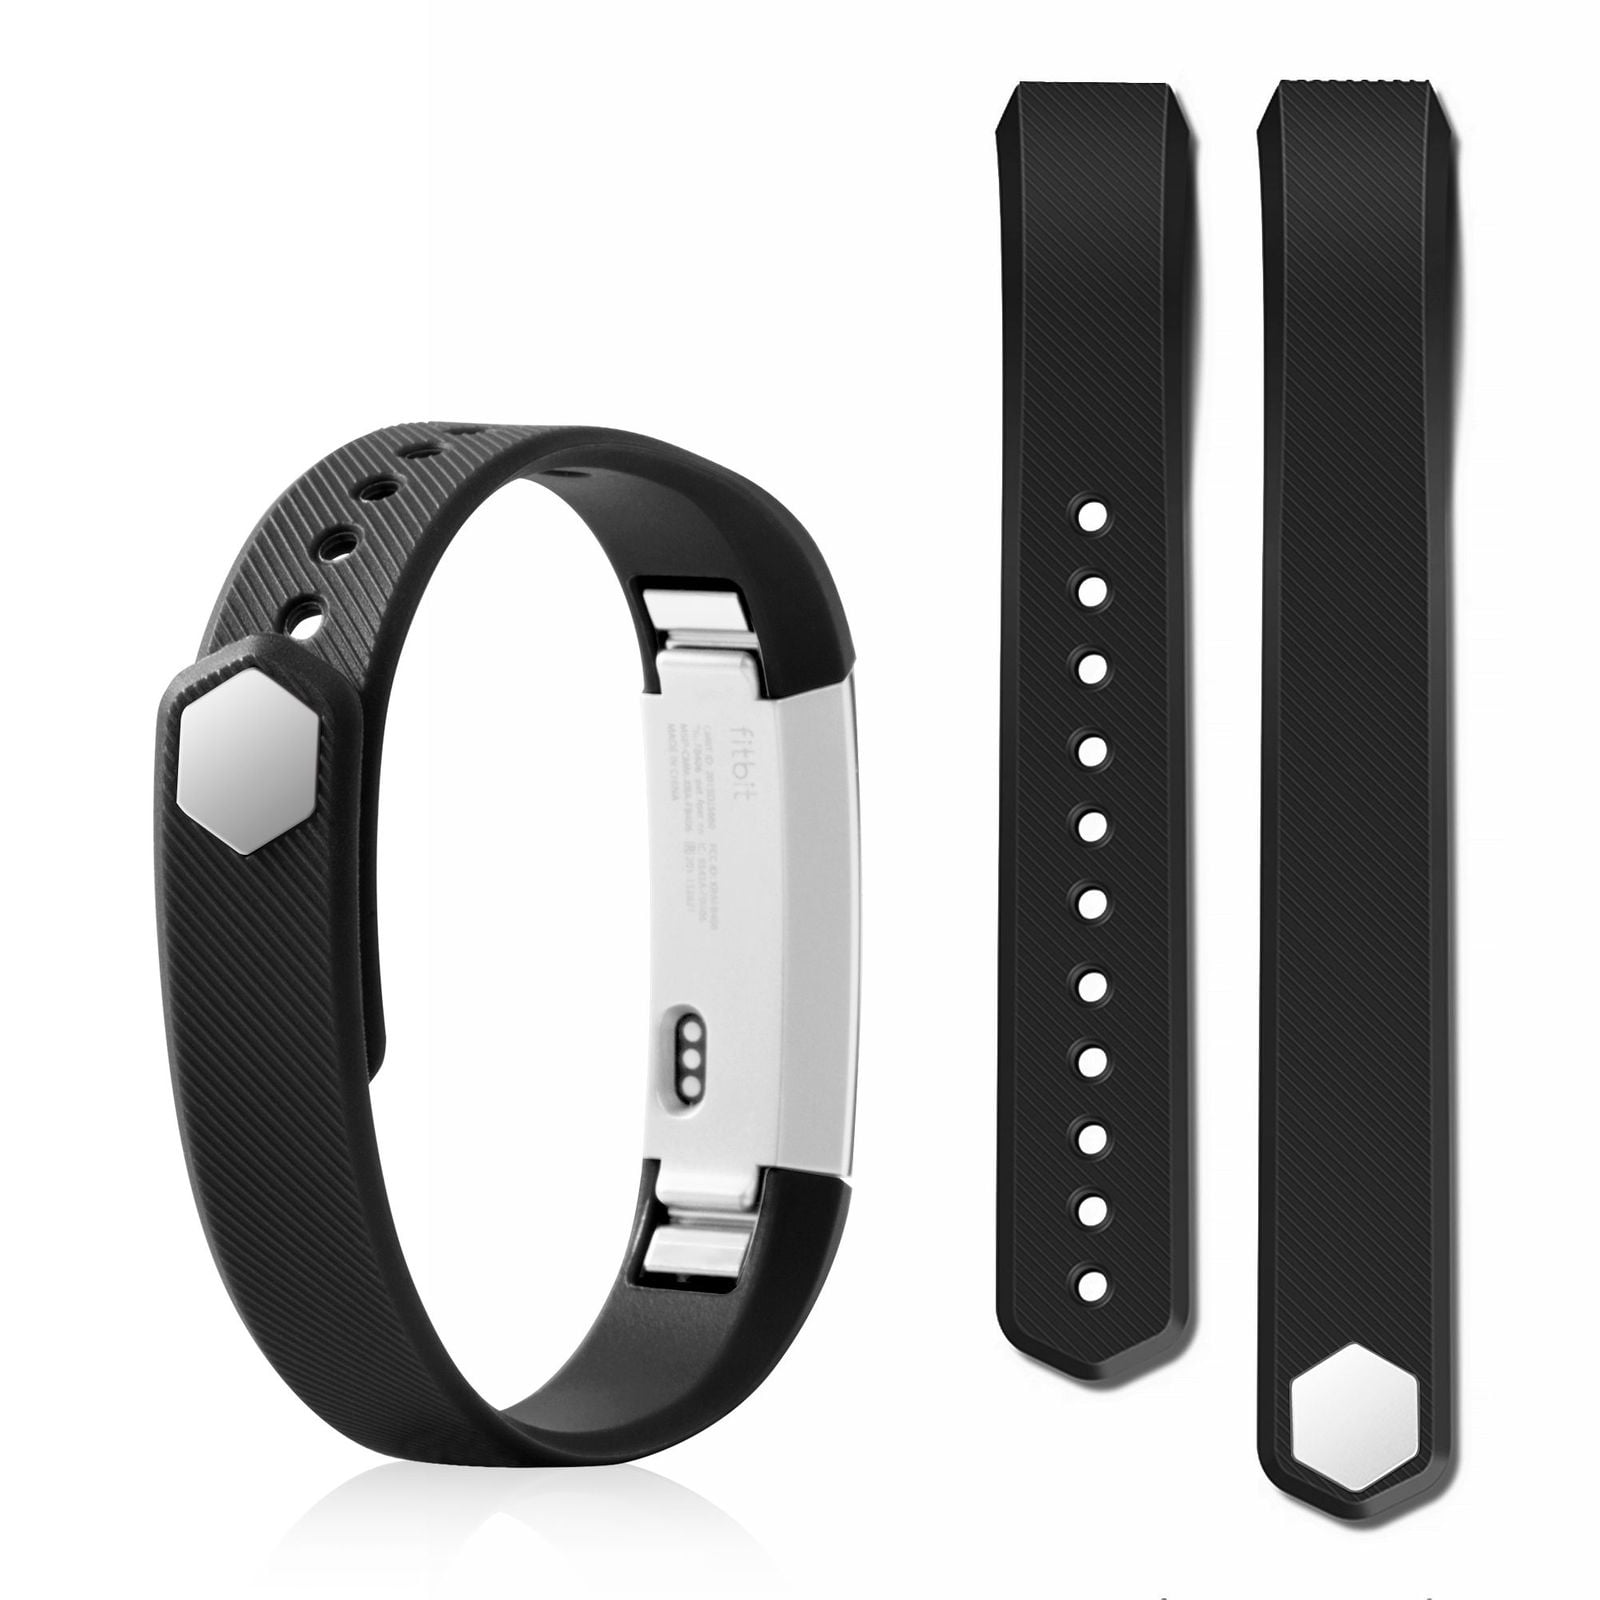 US New Soft Replacement Silicone Wrist Band Strap Clasp Buckle For Fitbit Alta x 